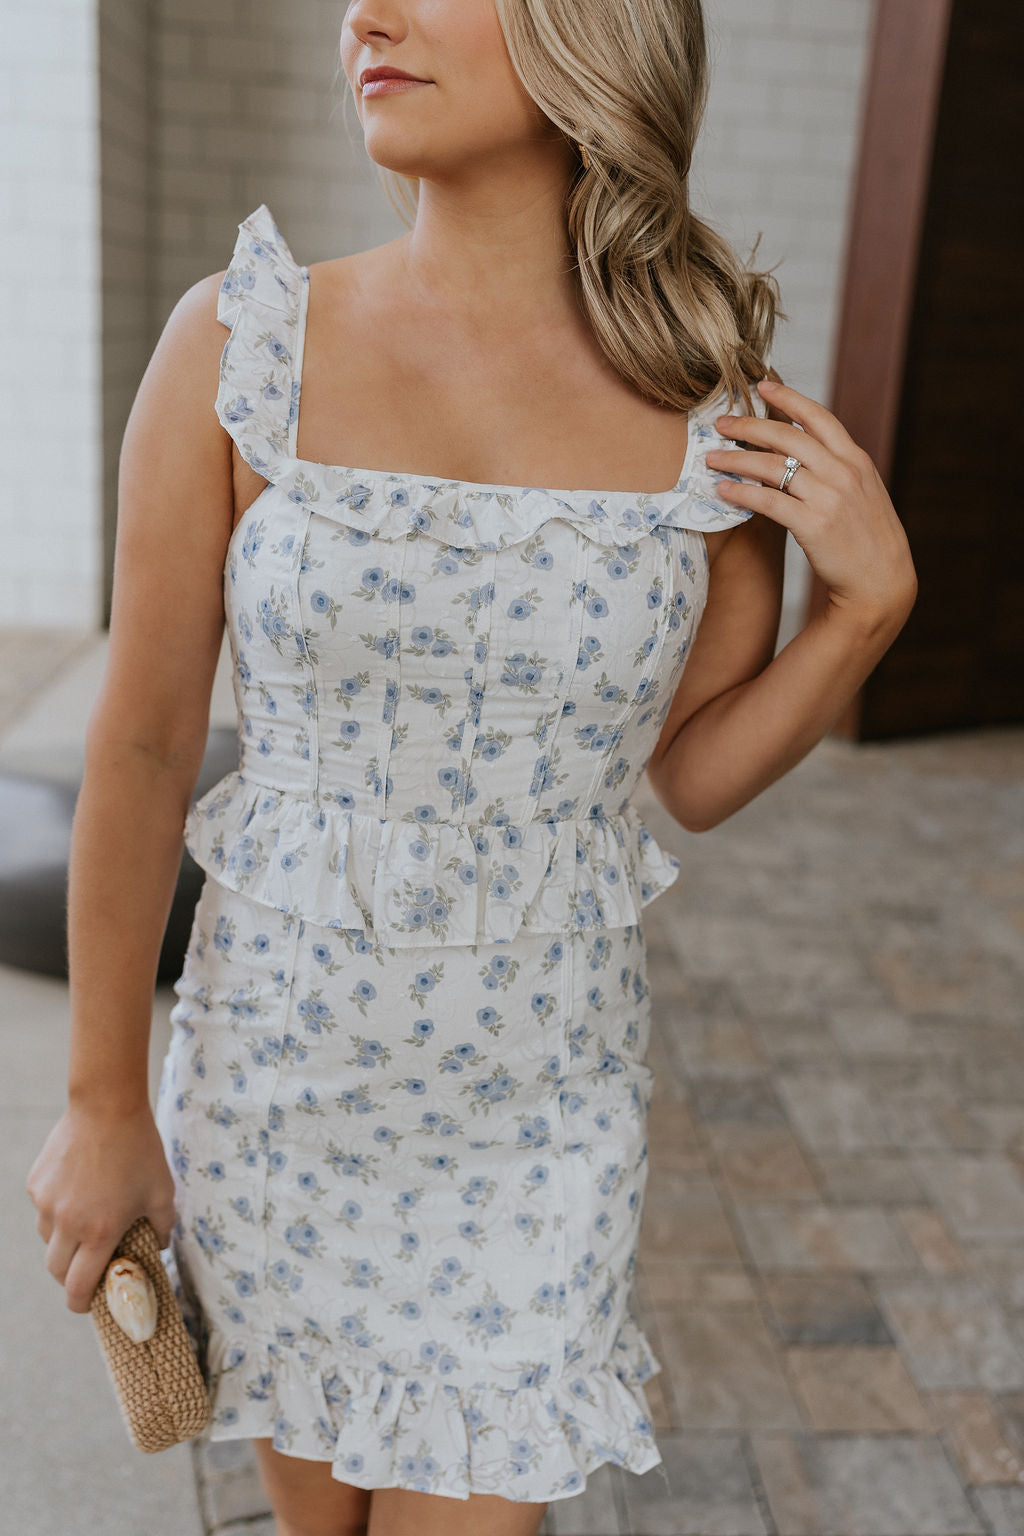 Close up view of female model wearing the Emerson White Blue Floral Ruffle Mini Dress which features White Lightweight Fabric, Blue Floral Print, Ruffle Hem Design, Square Neckline and sleeveless